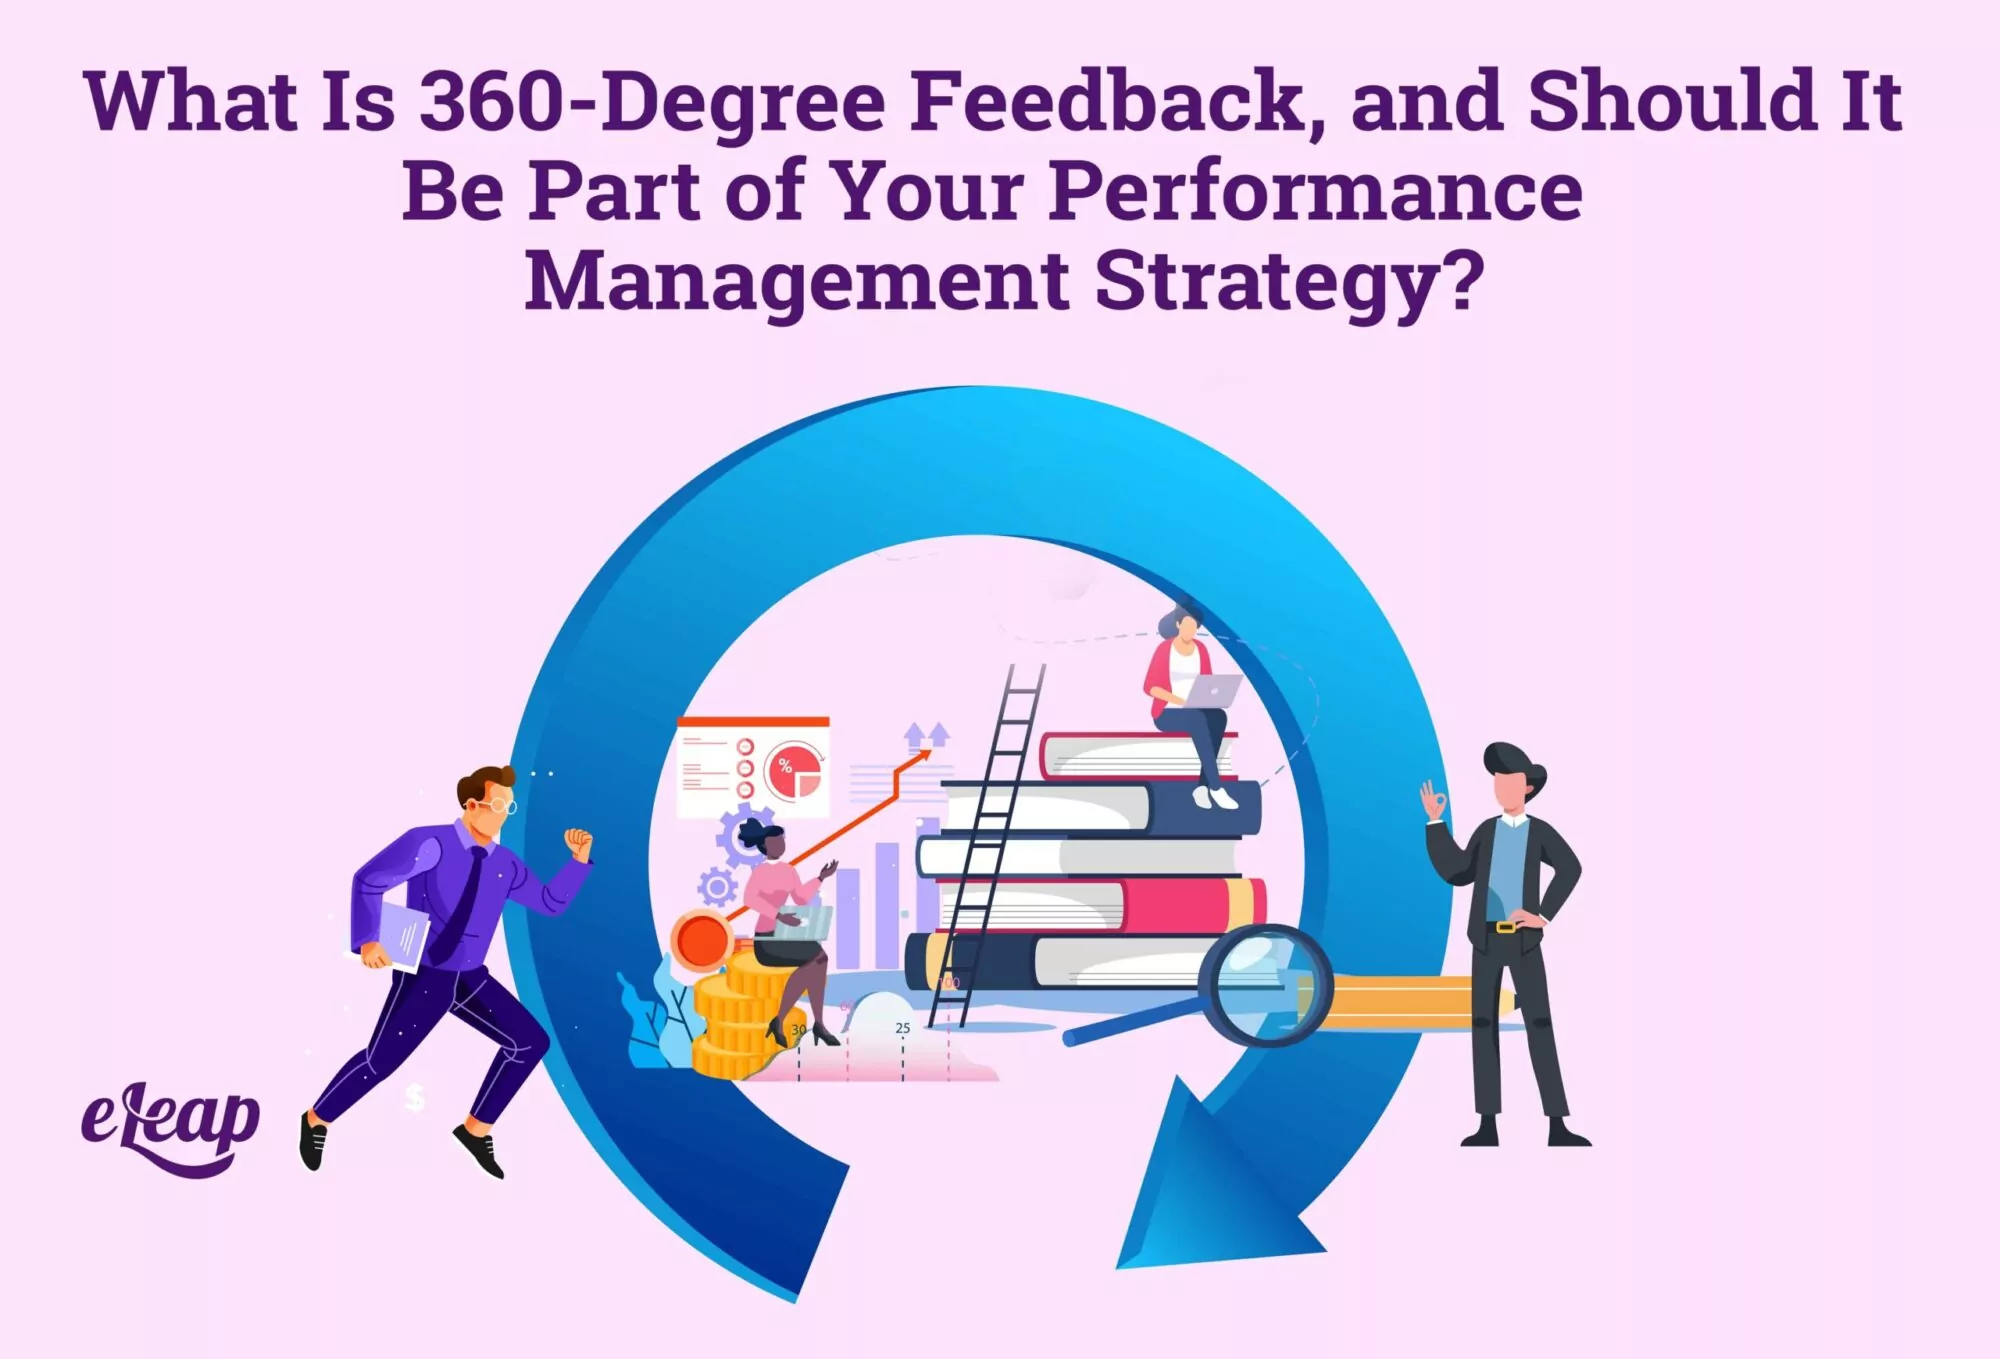 What Is 360-Degree Feedback, and Should It Be Part of Your Performance Management Strategy?